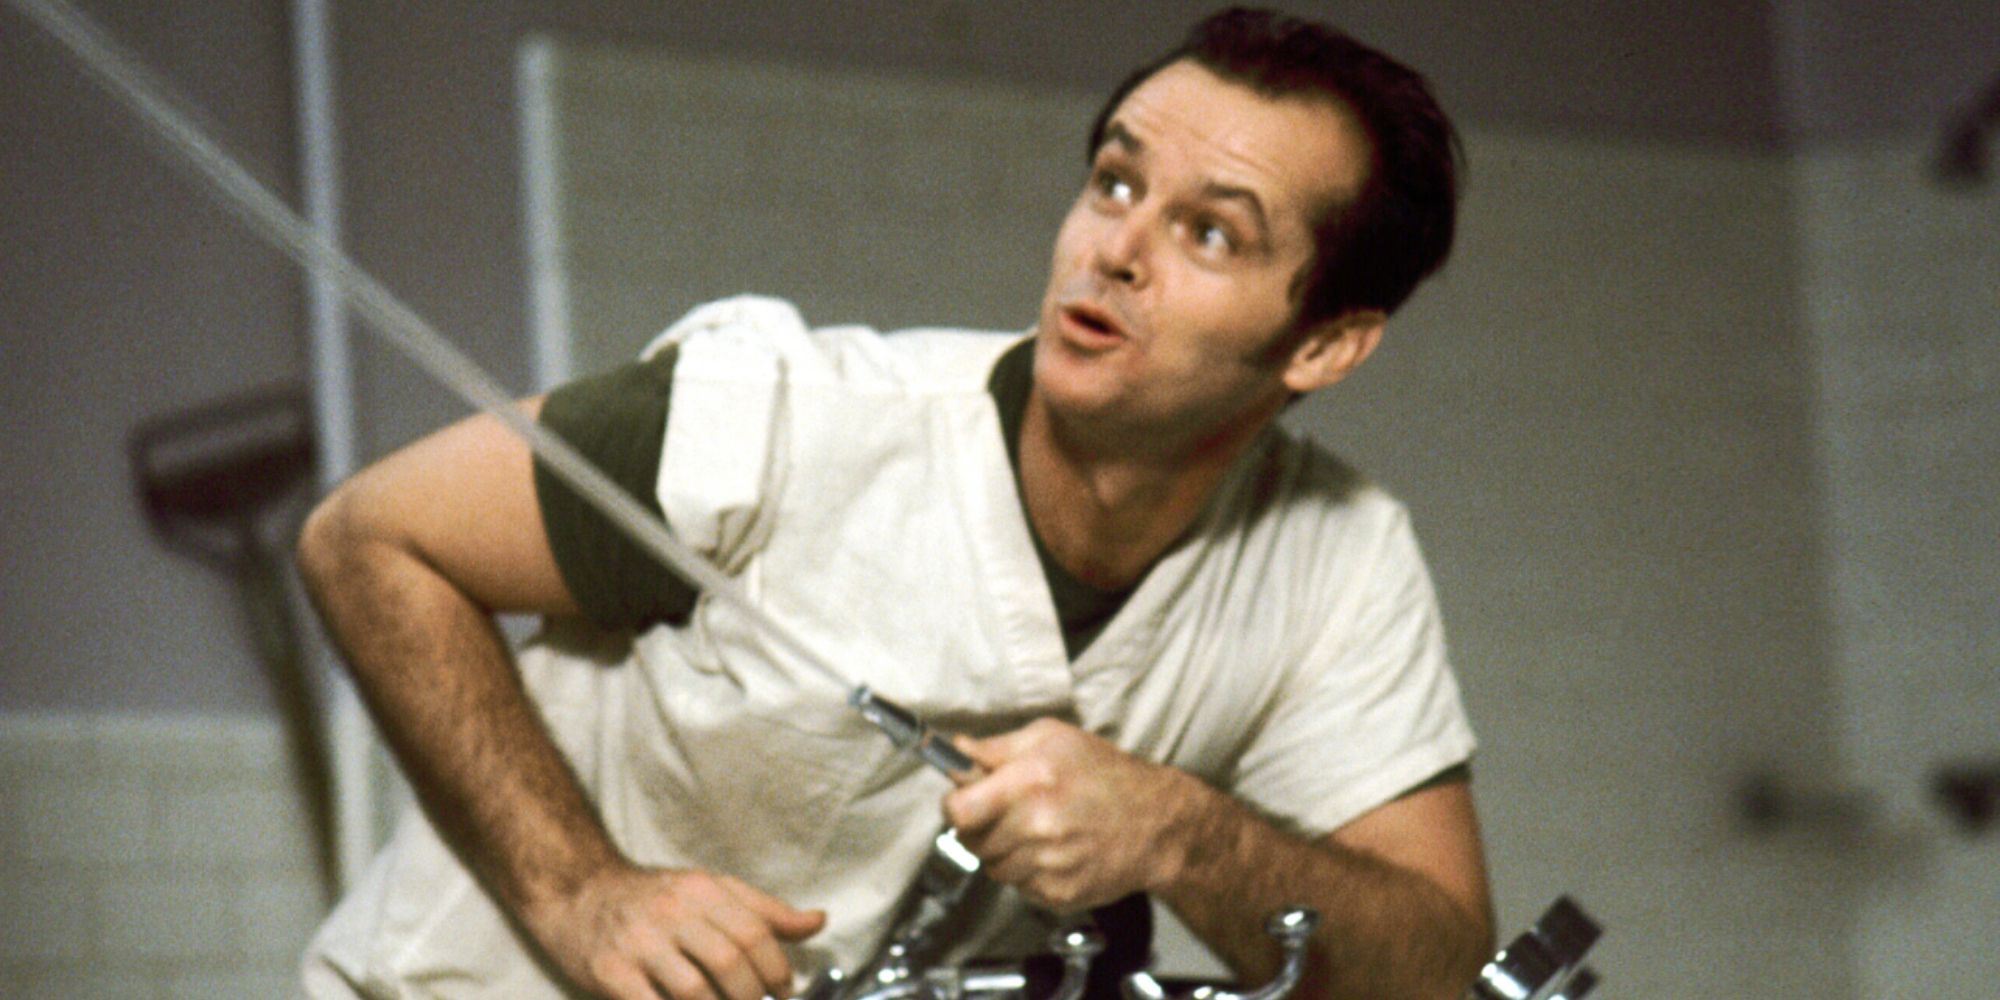 Jack Nicholson - One Flew Over the Cuckoo's Nest